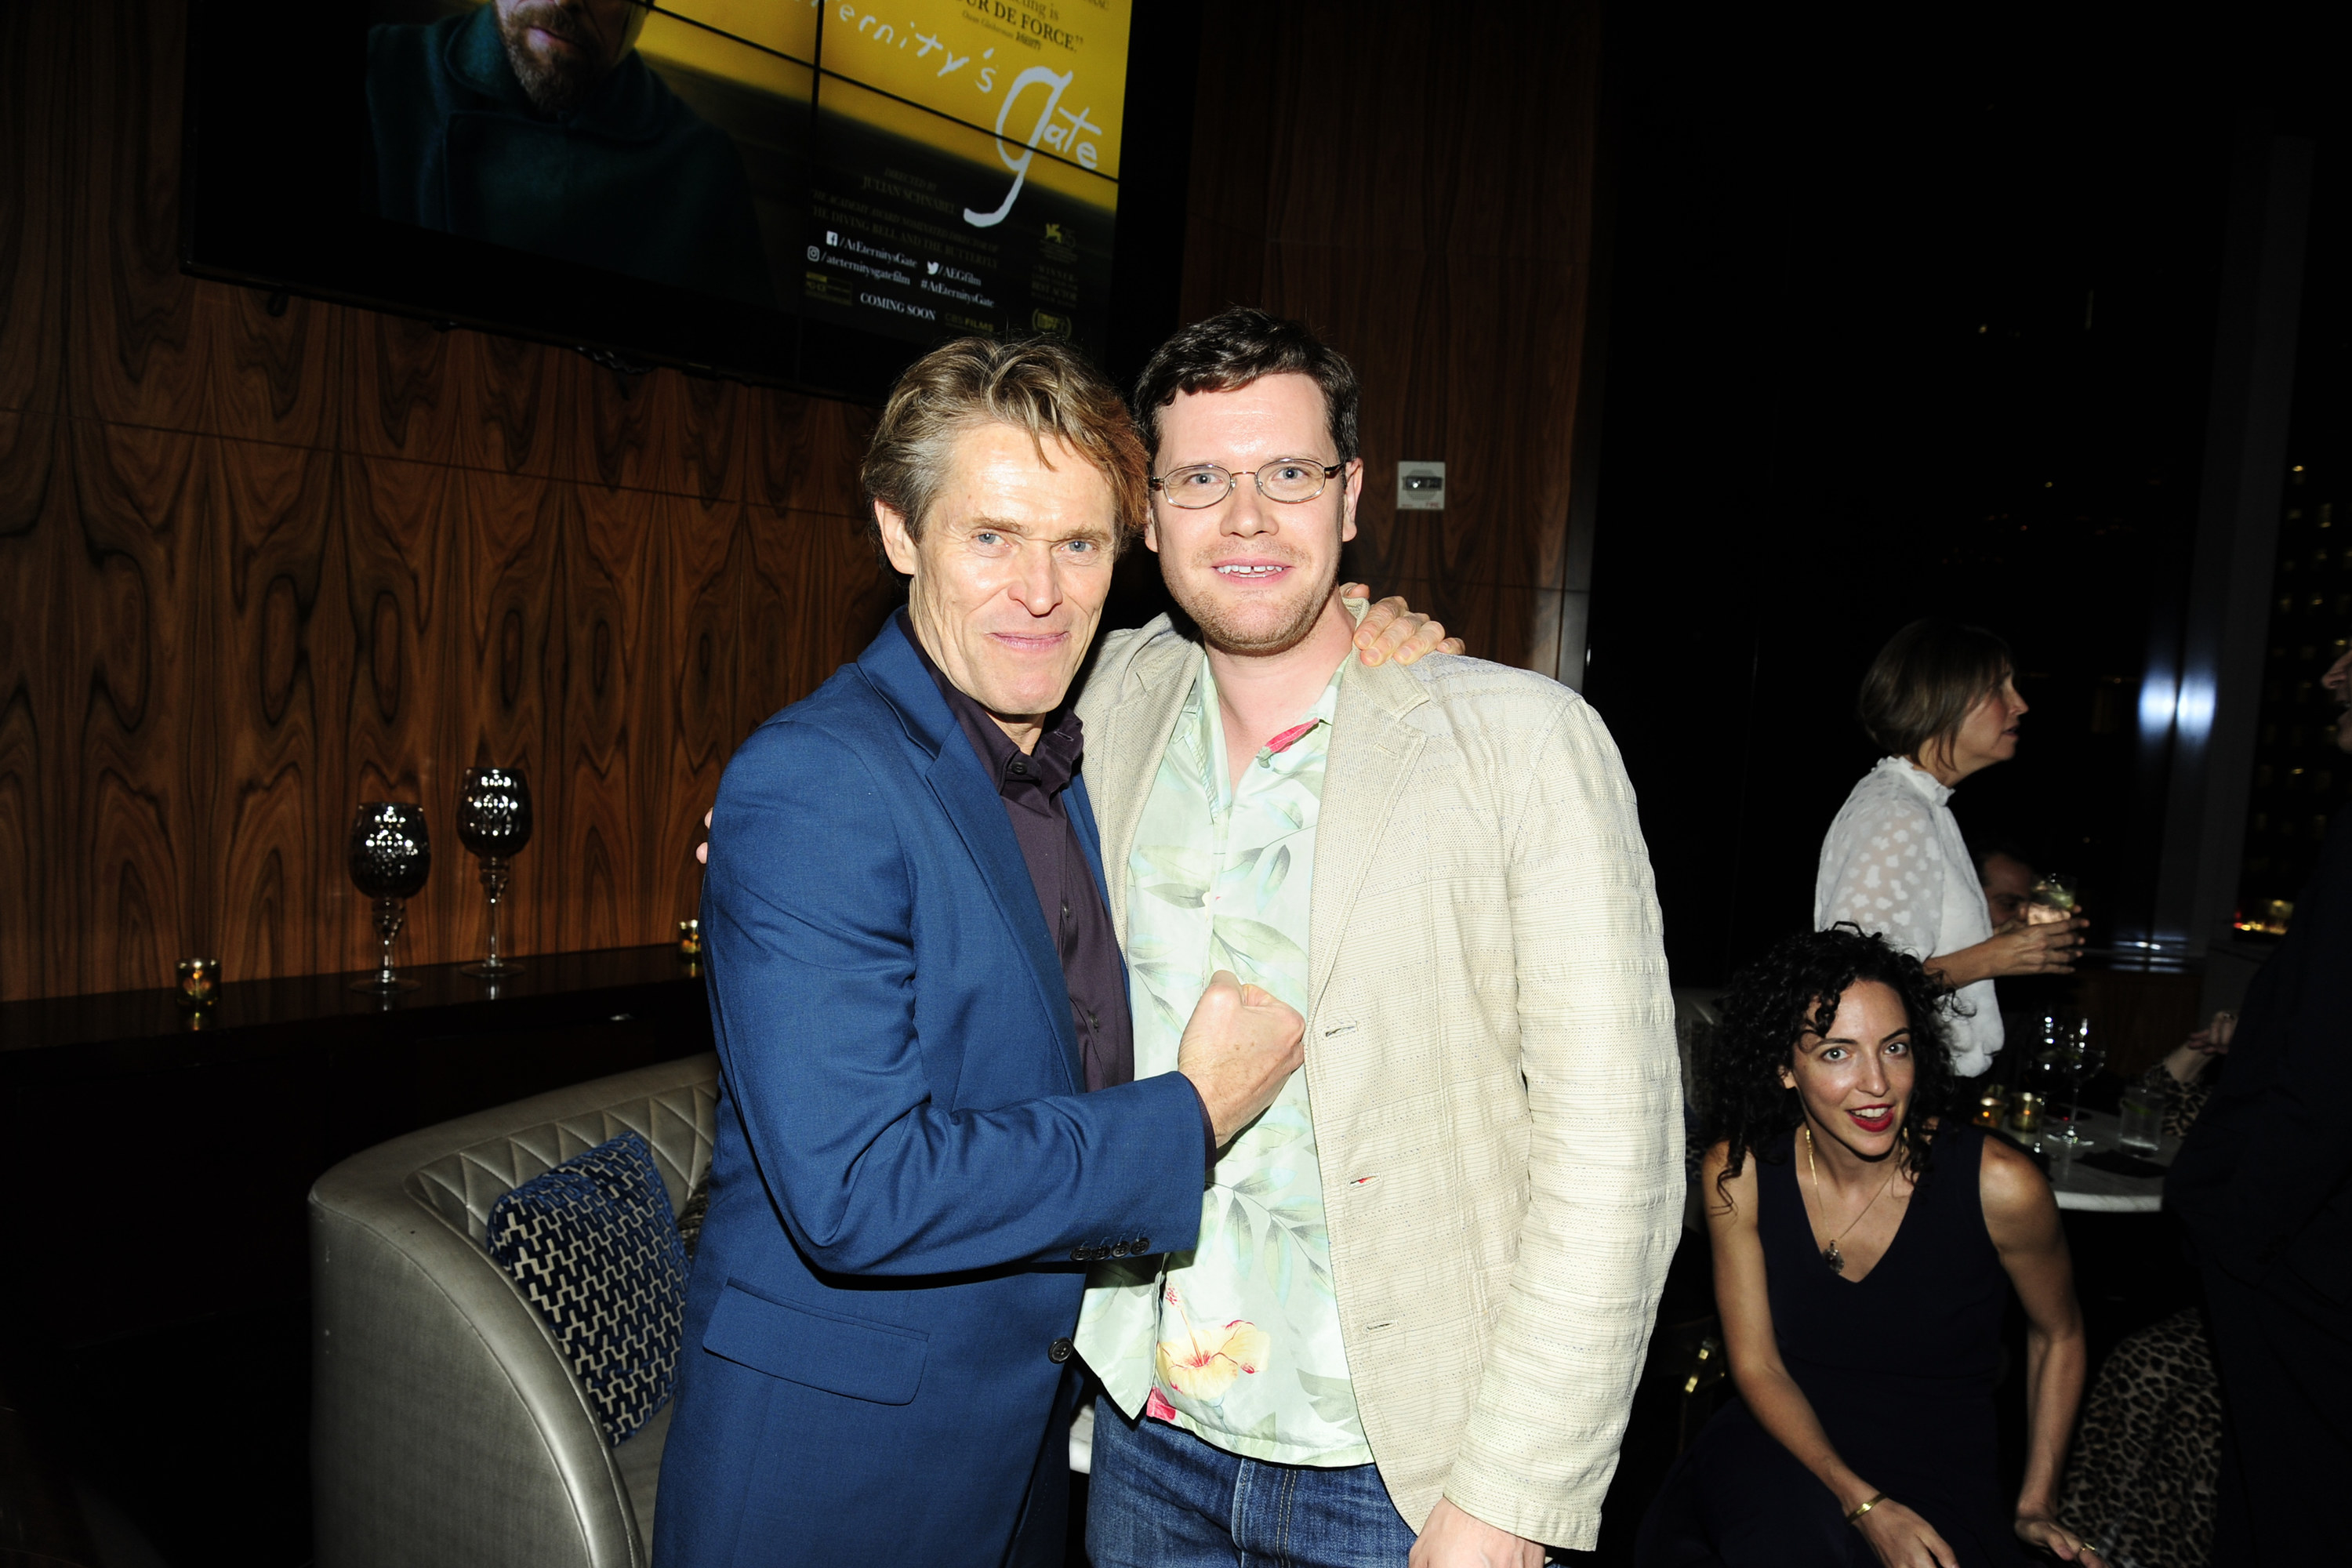 Willem Dafoe and Jack Dafoe attend NYFF56 Closing Night Gala Presentation &amp;amp; North American Premiere Of &quot;At Eternity&#x27;s Gate&quot; - After Party at Ascent, NYC on October 12, 2018